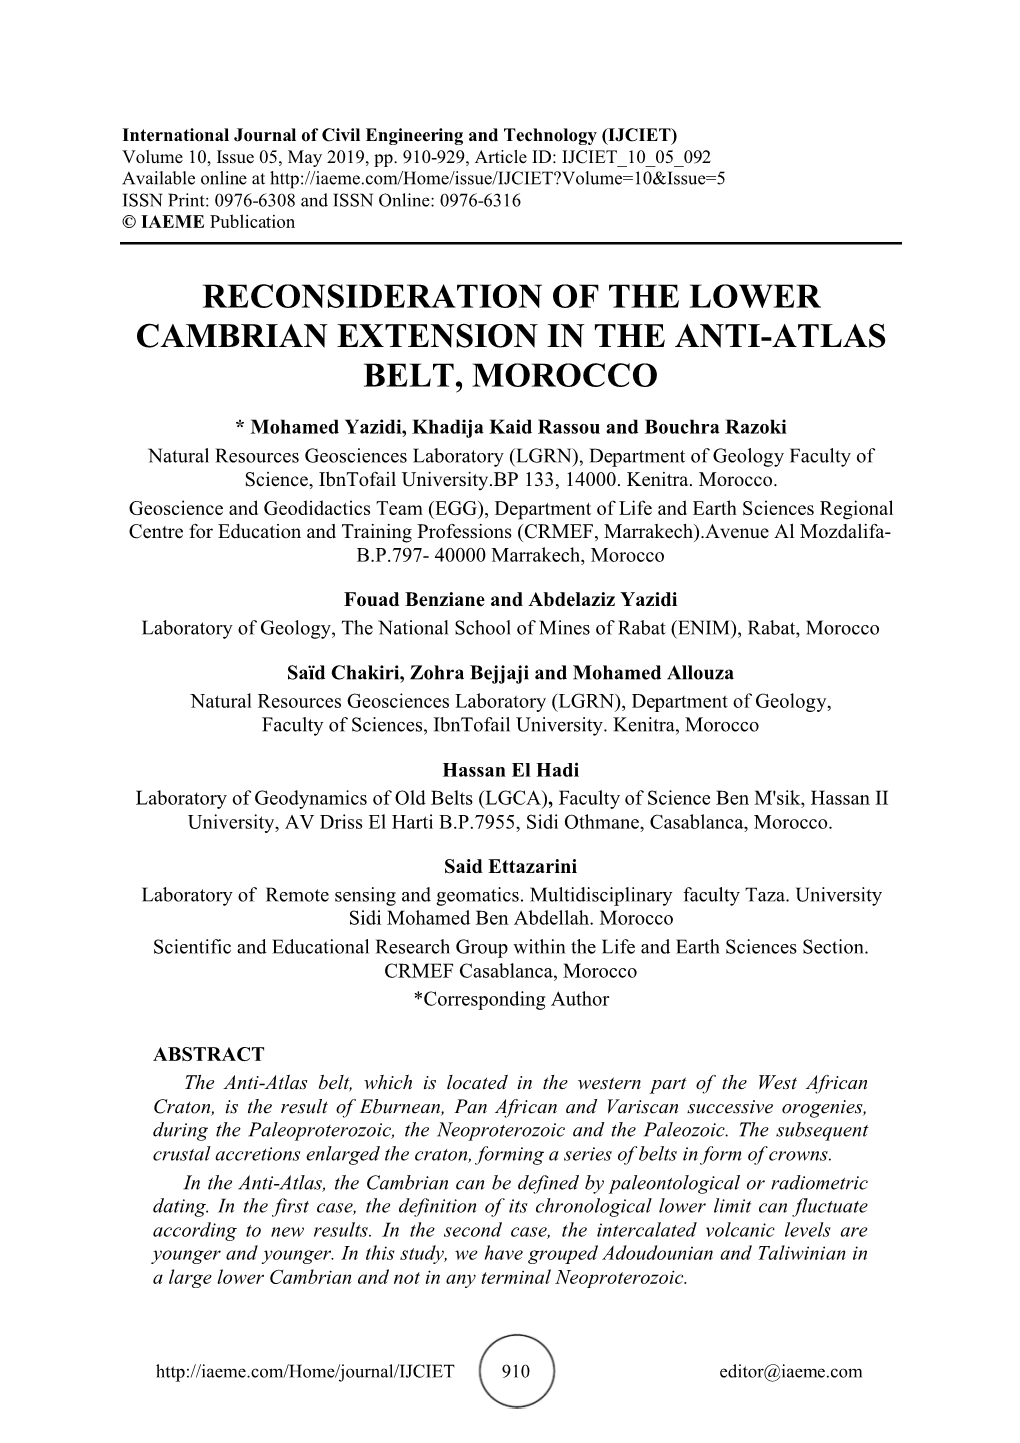 Reconsideration of the Lower Cambrian Extension in the Anti-Atlas Belt, Morocco